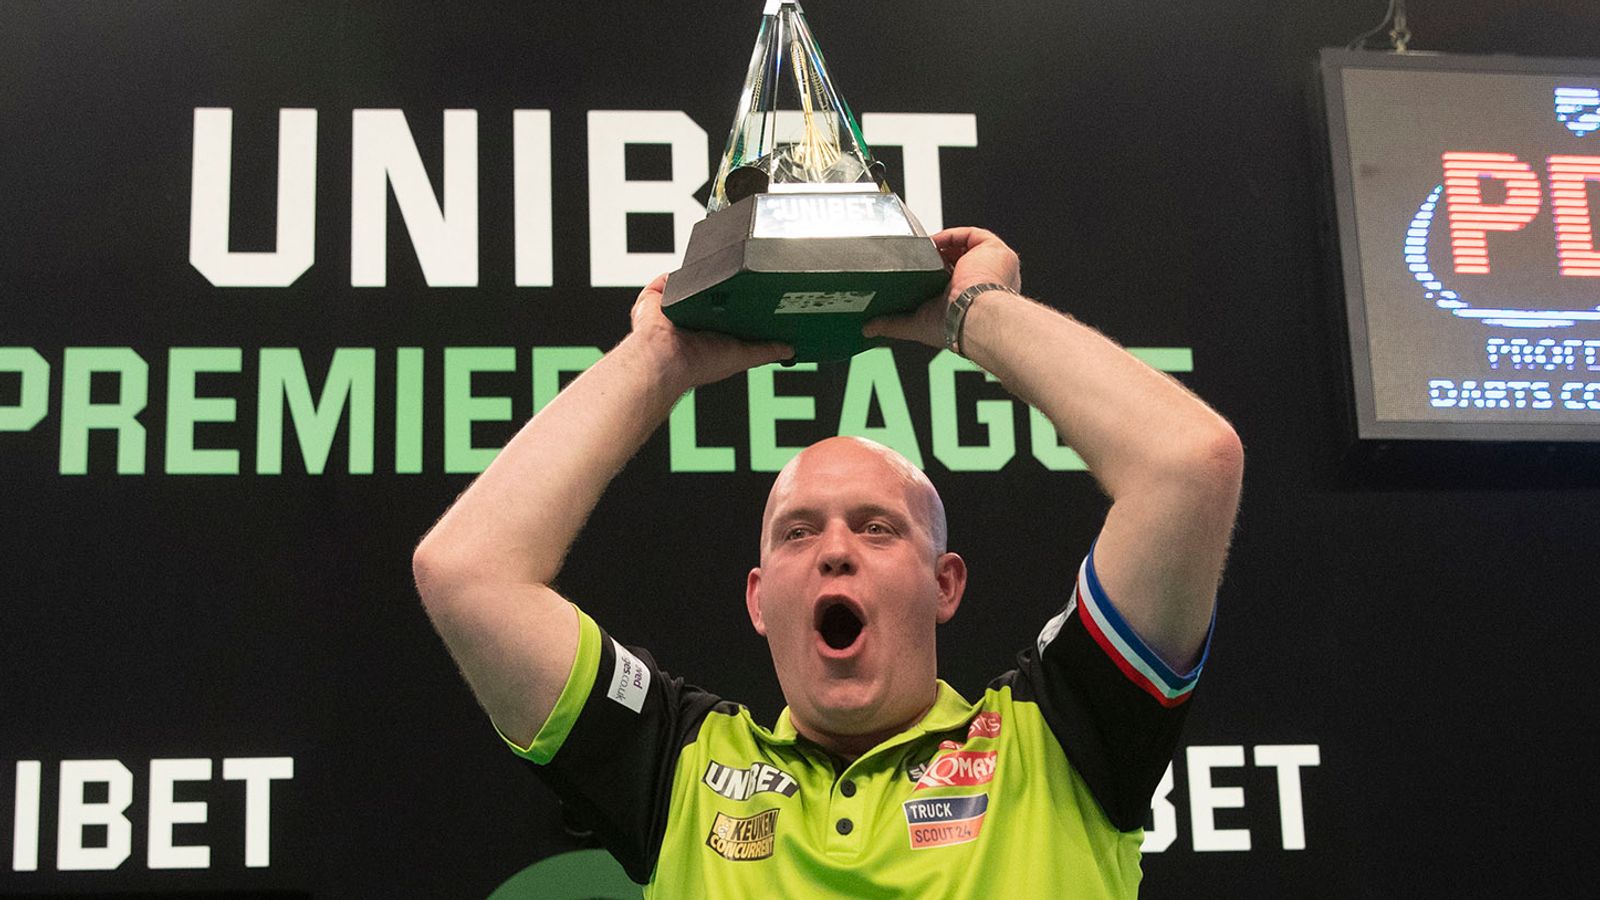 2020 Premier League Darts and dates announced | News Sky Sports